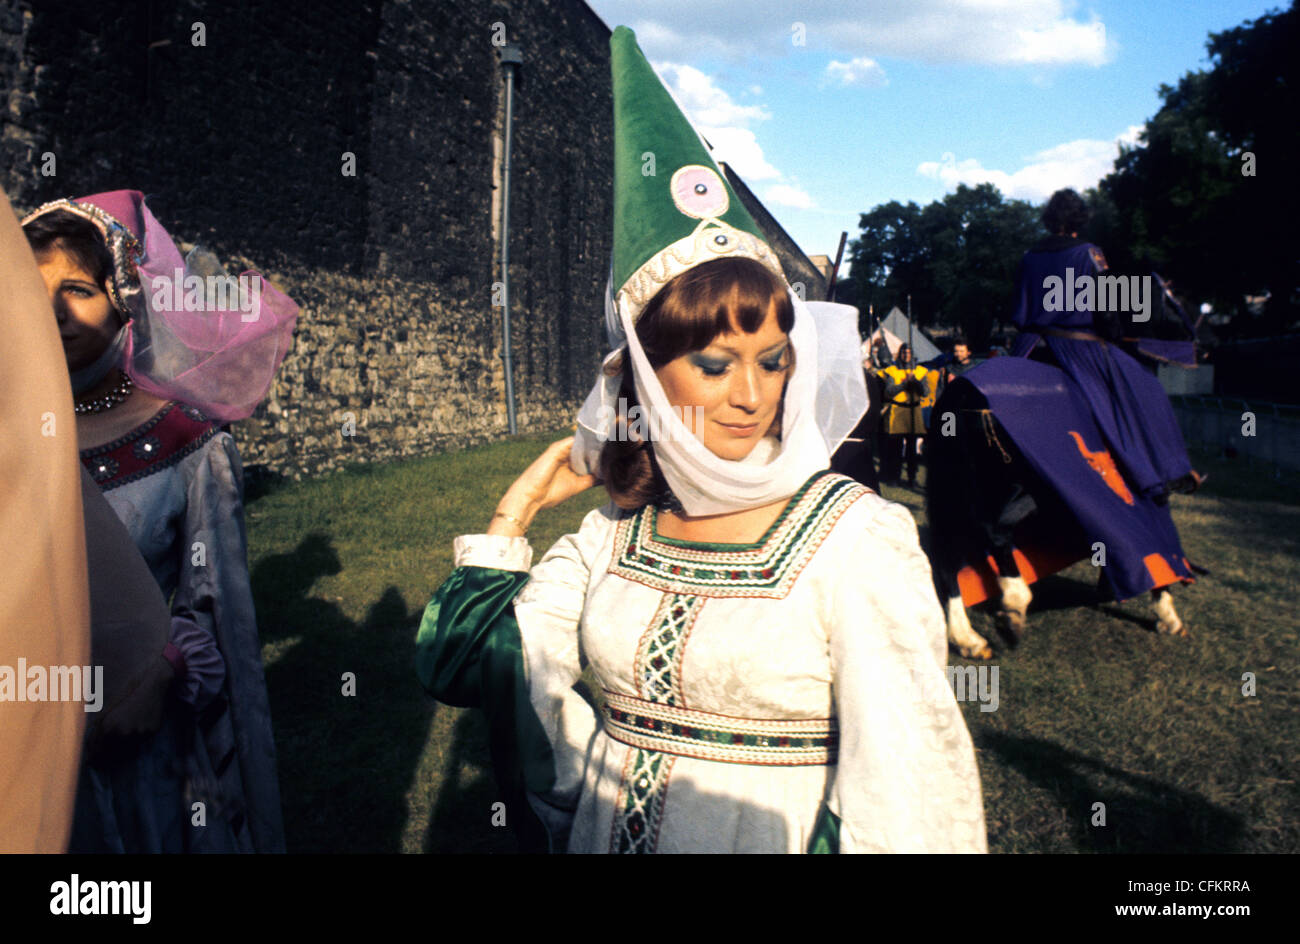 A fair Maiden  in period costume at a Jousting event at The Tower of London UK Stock Photo